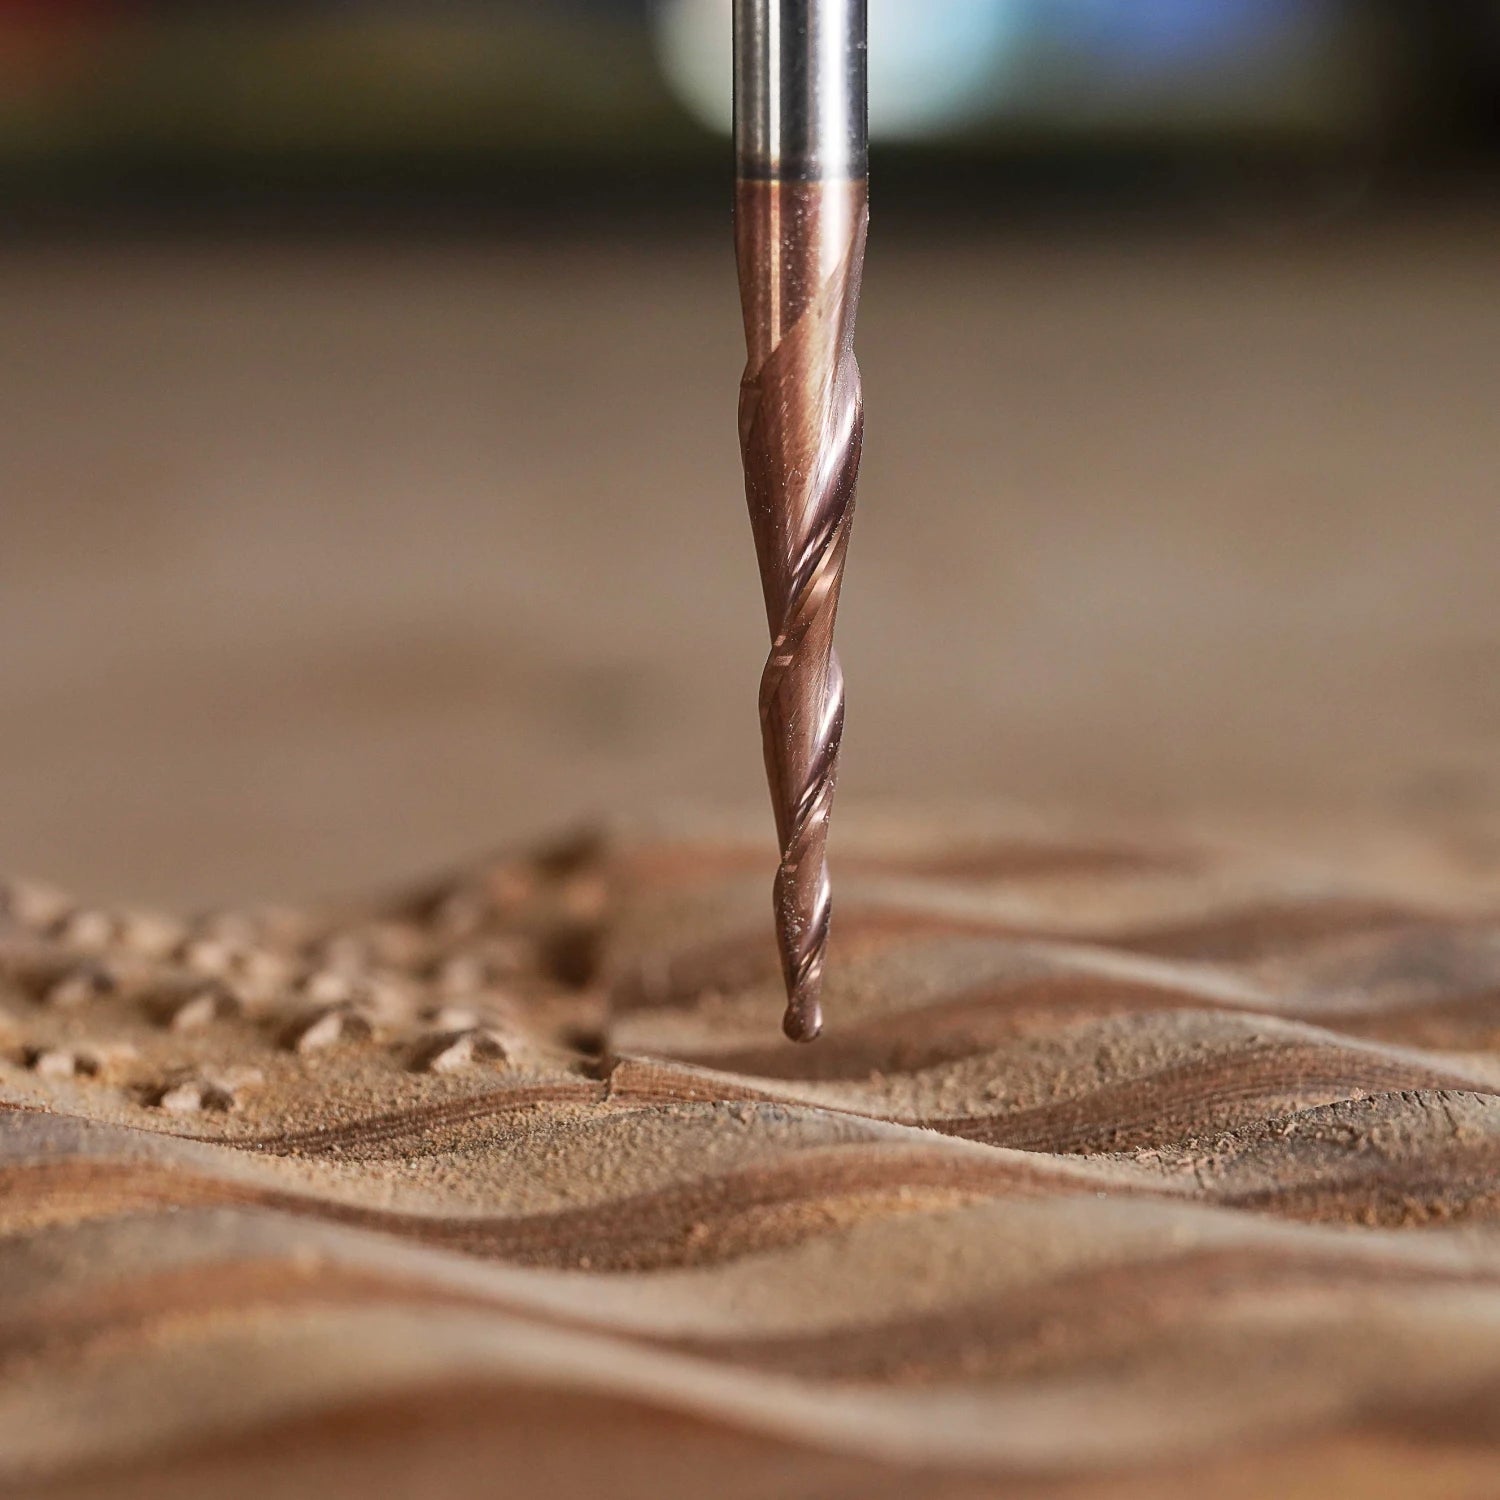 SpeTool H-Si Coated Carving Router Bits Project